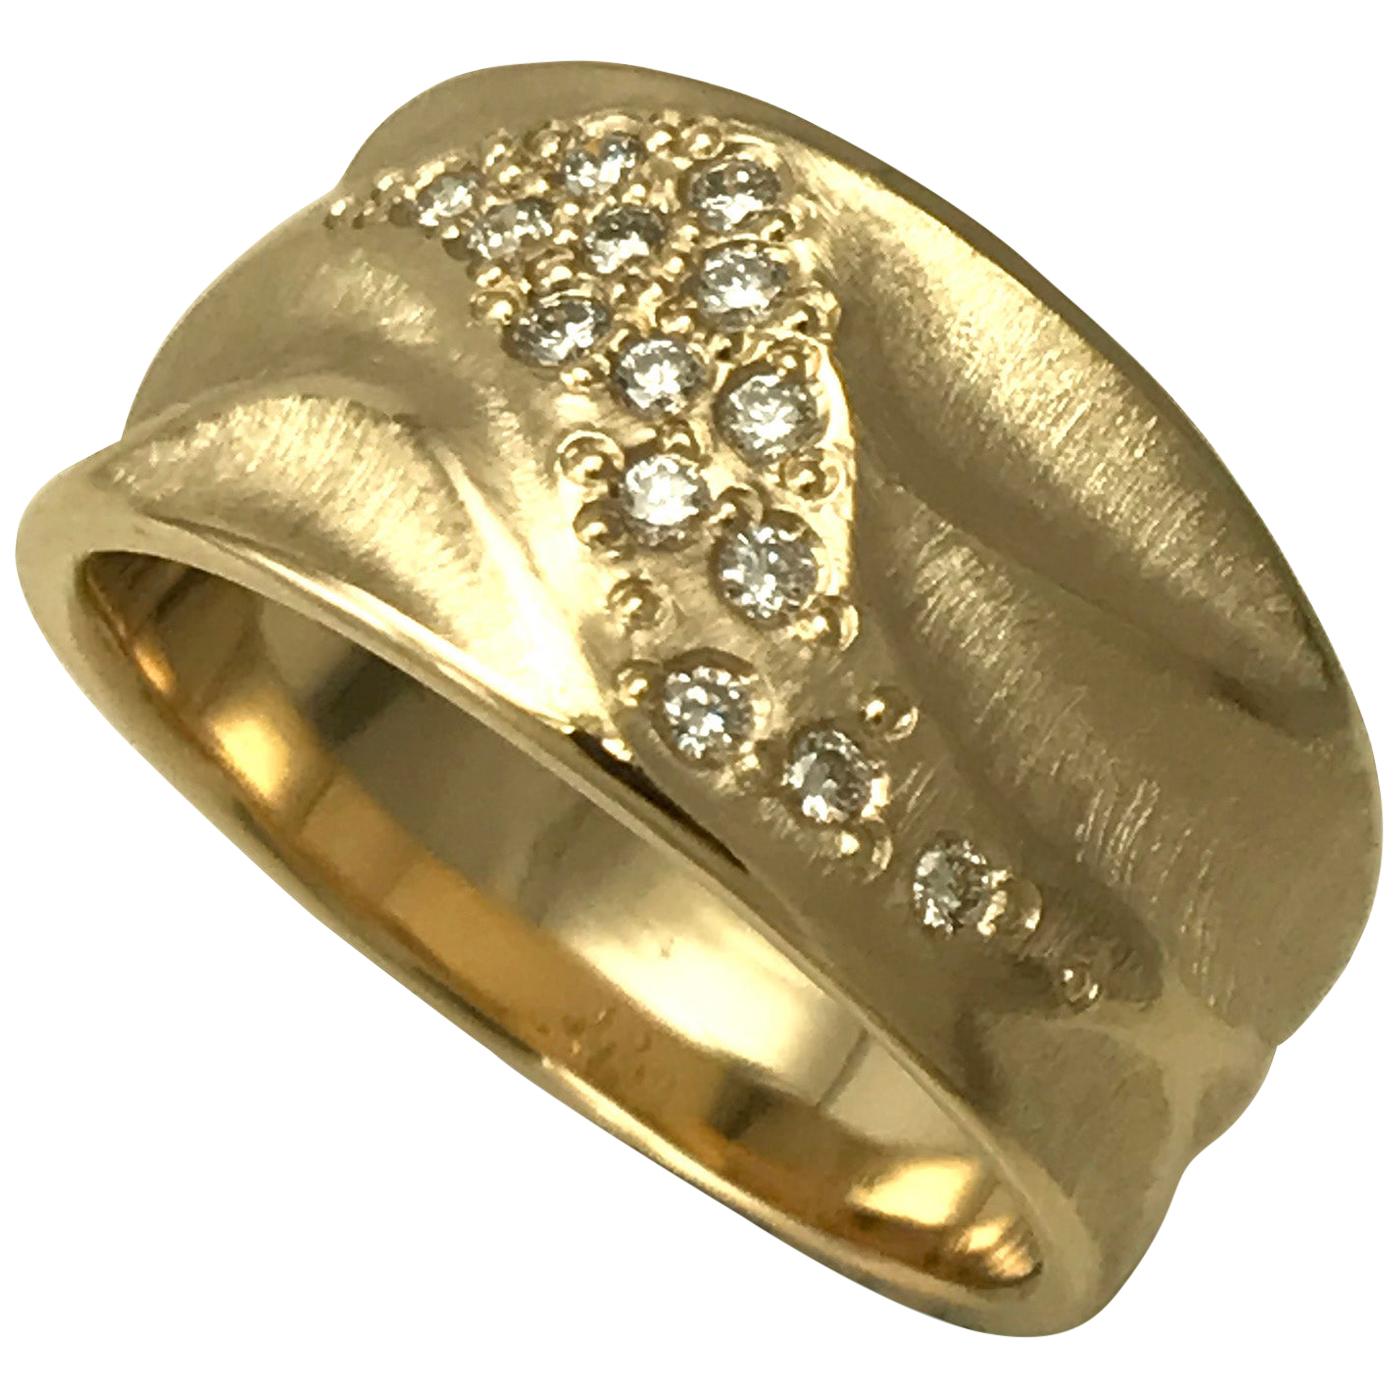 Wide 14 Karat Yellow Gold Textured Ring with White Diamond Cluster by K.MITA For Sale